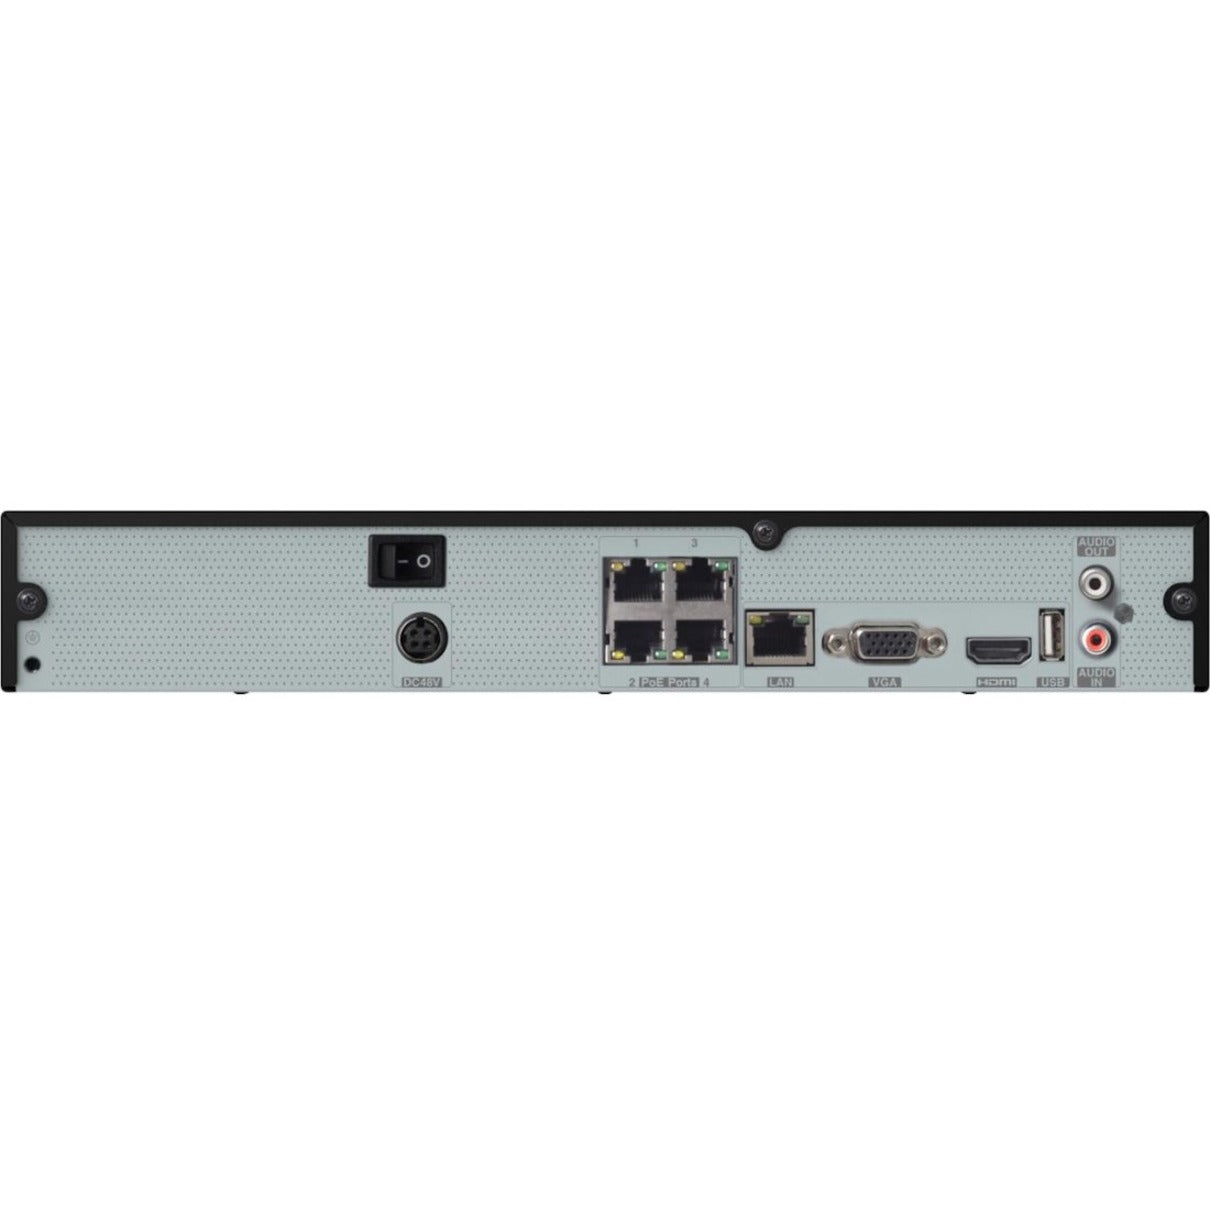 Speco 4 Channel NVR with Built-in PoE Ports - 6 TB HDD